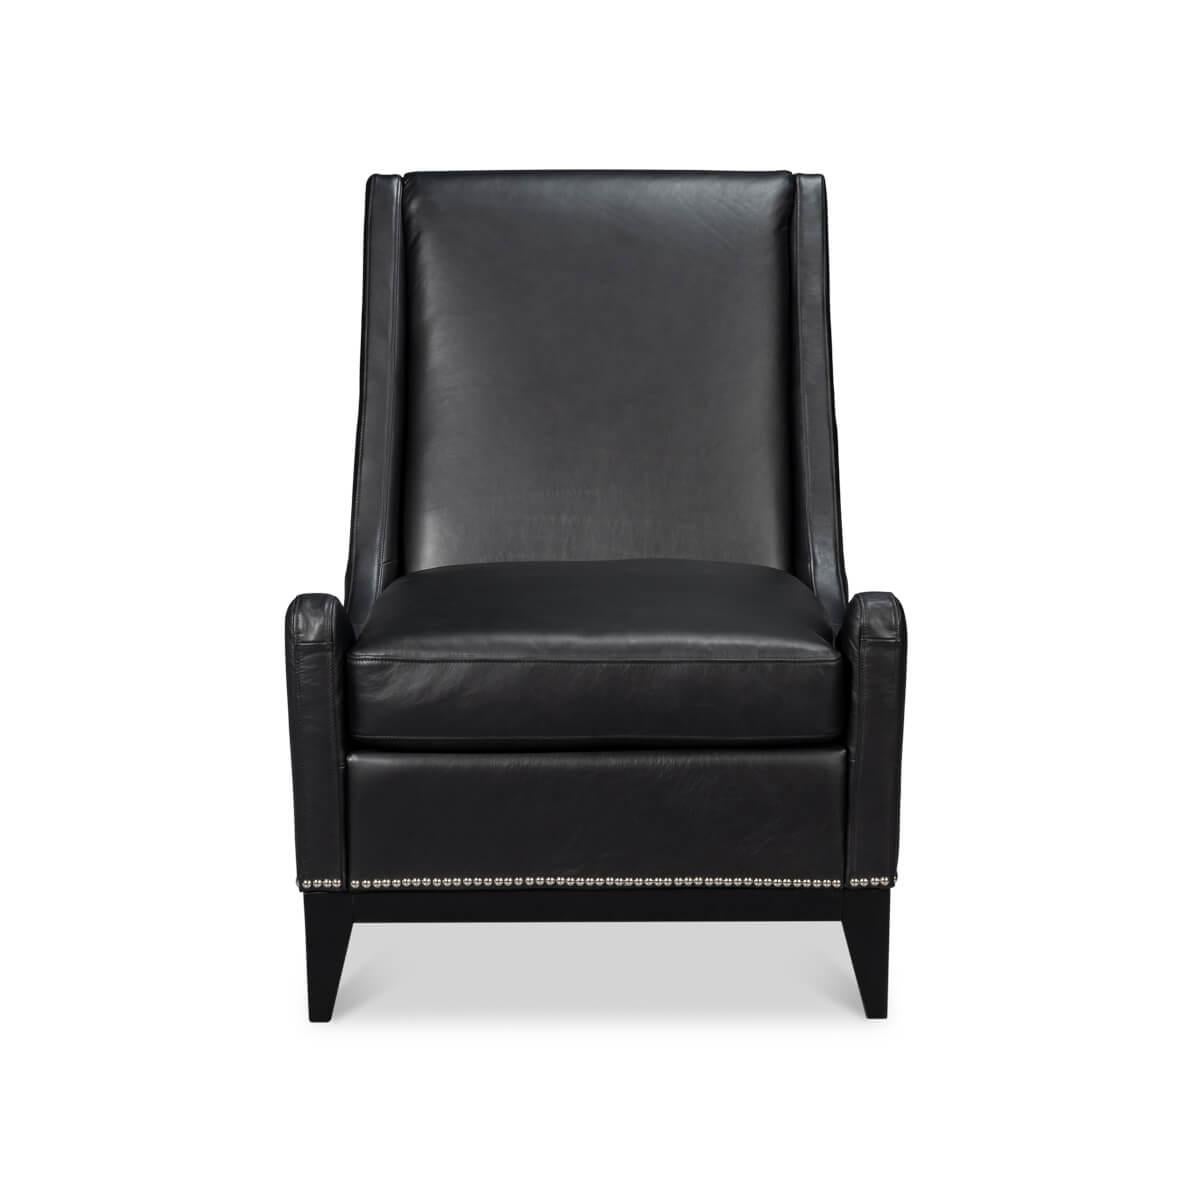 Crafted with meticulous attention to detail, this chair features supple top-grain leather that beckons you to sit and unwind. The dark Onyx Black leather is beautifully complemented by the classic nailhead trim, exuding a sense of luxury and